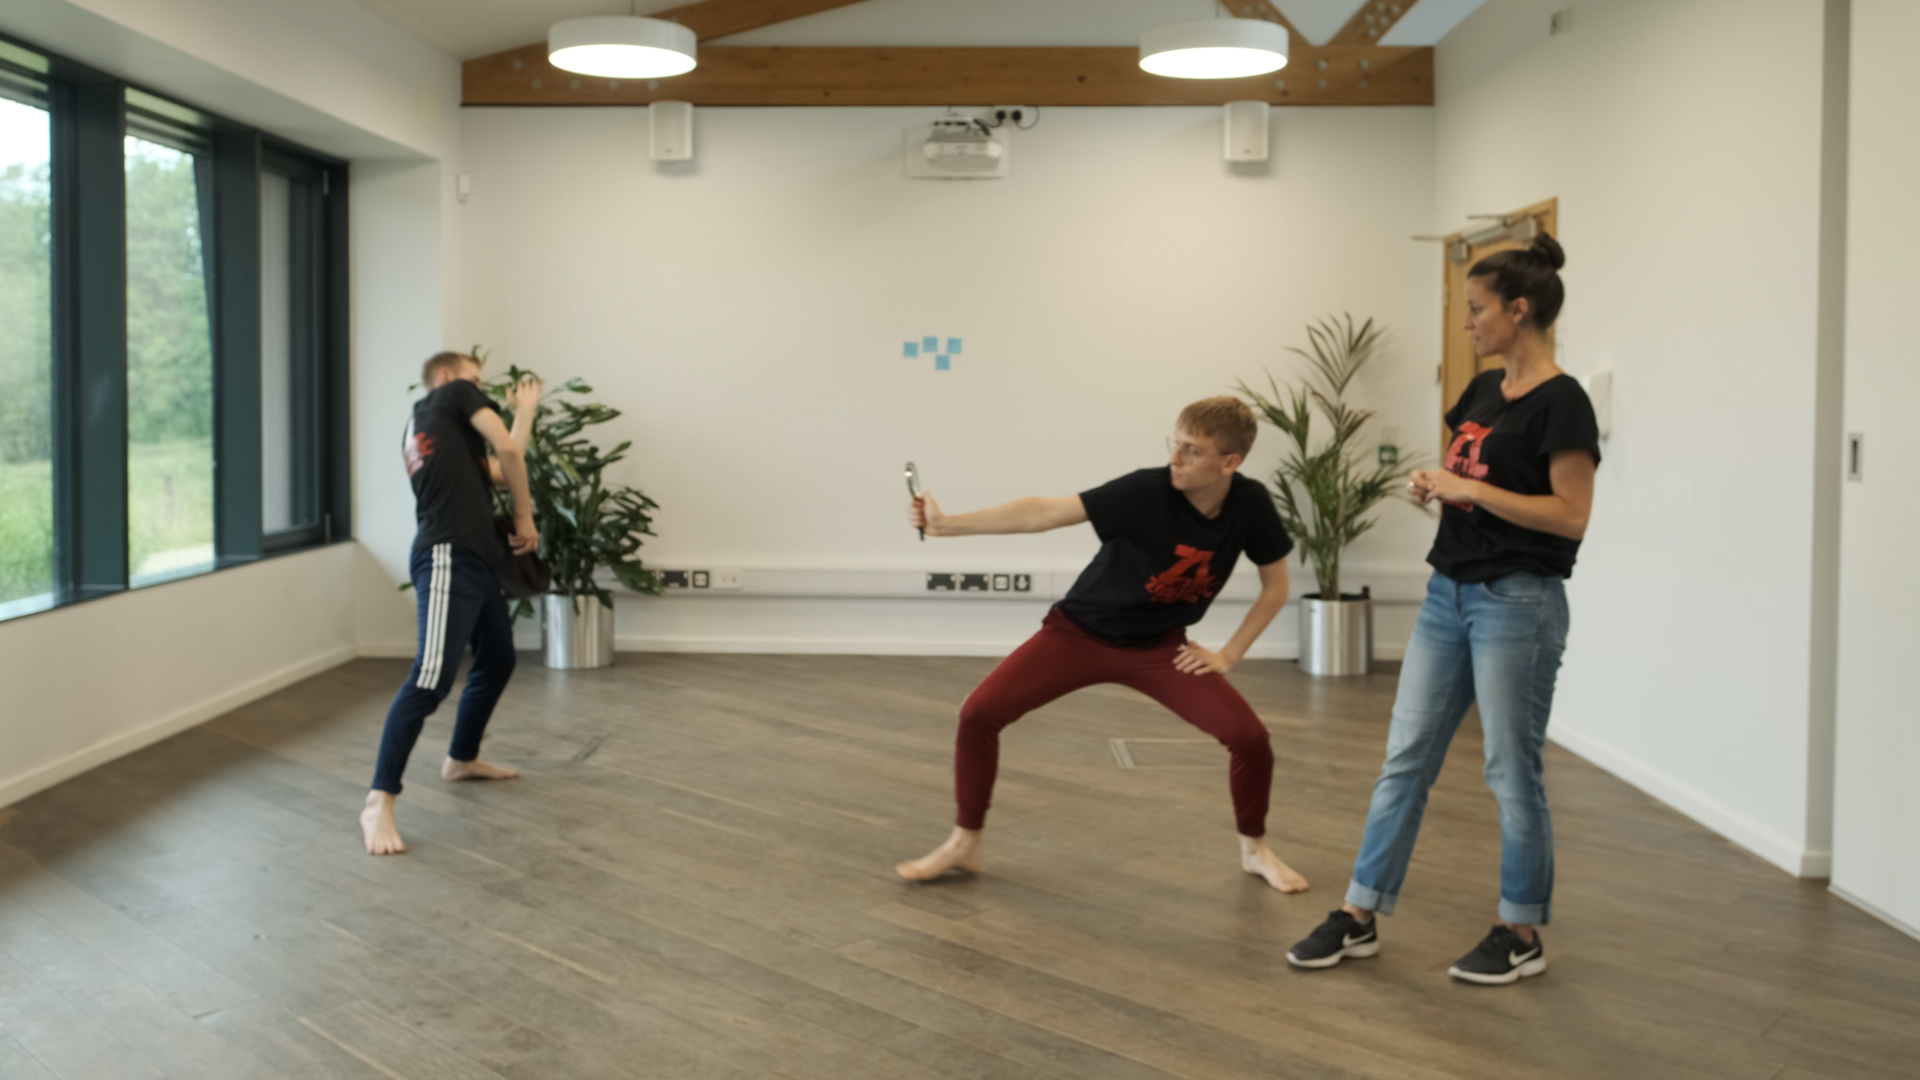 Two dancers and a choreographer are working together in a studio space. The dancers are moving and creating shapes with a prop in their hand